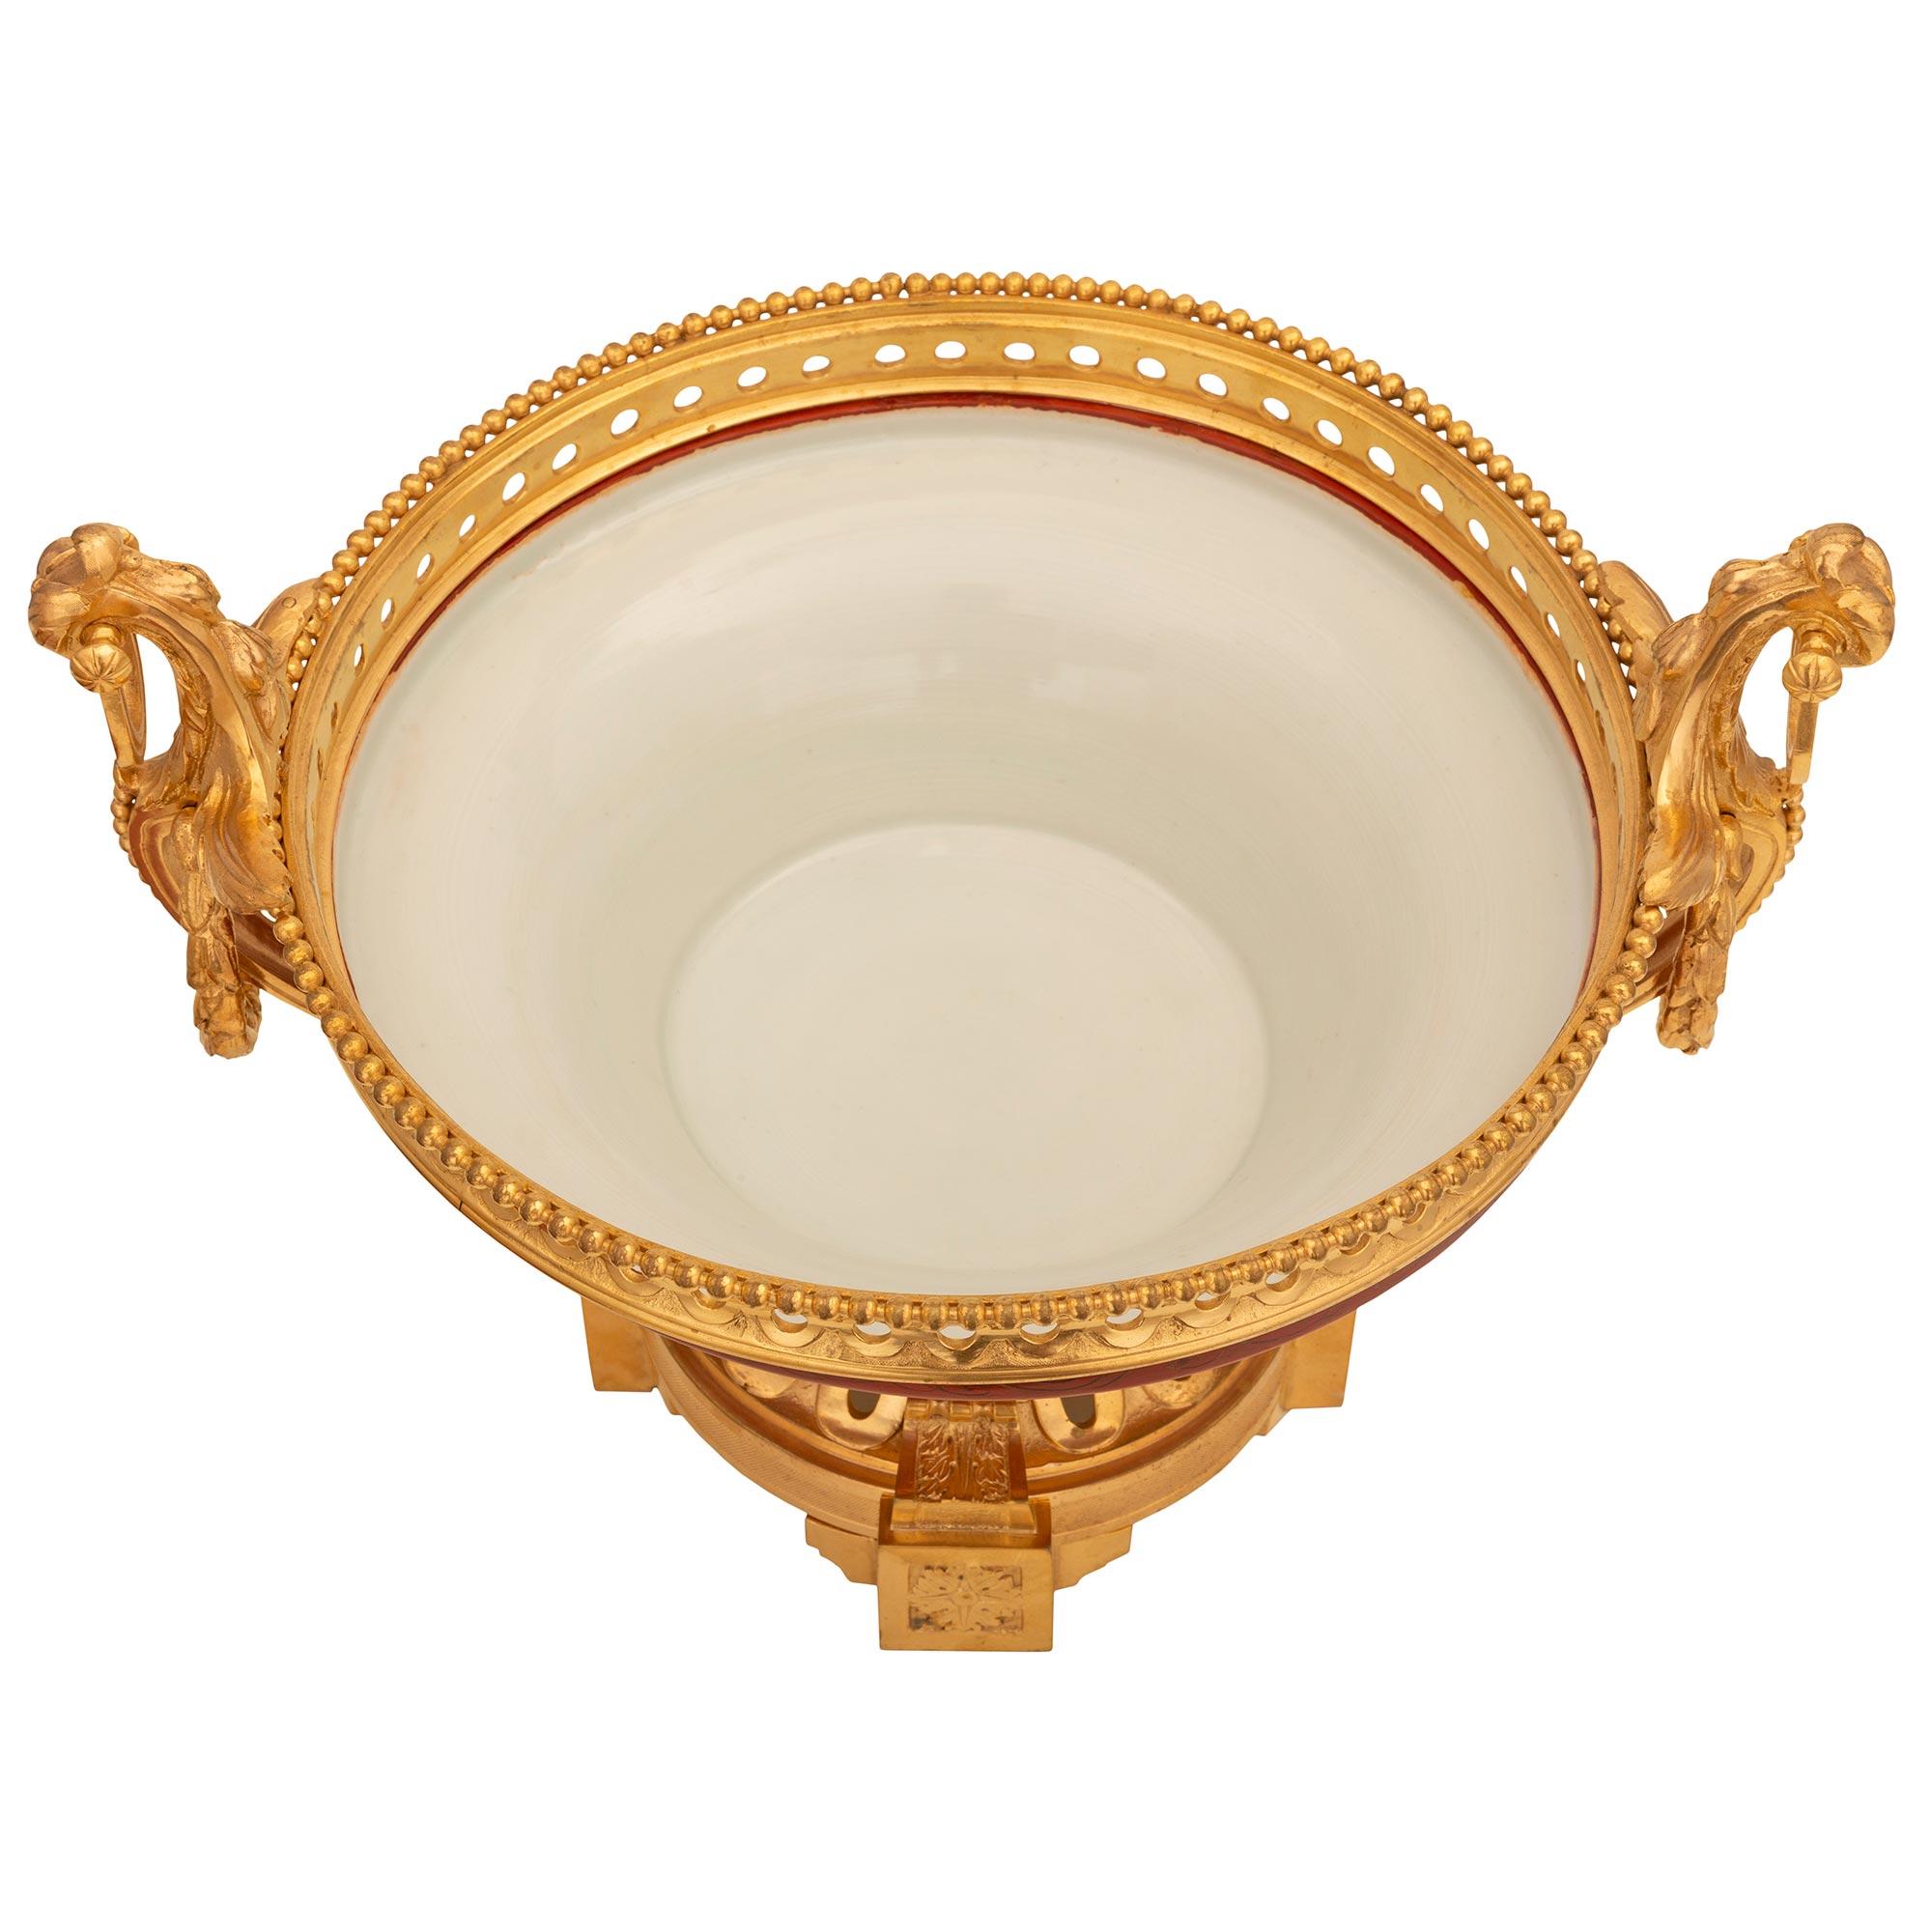 An exceptional and very unique French and Asian collaboration 19th century Louis XVI st. Belle Époque period Japanese lacquered, Kutani porcelain and ormolu potpourri centerpiece. The centerpiece is raised by a beautiful circular base with fine